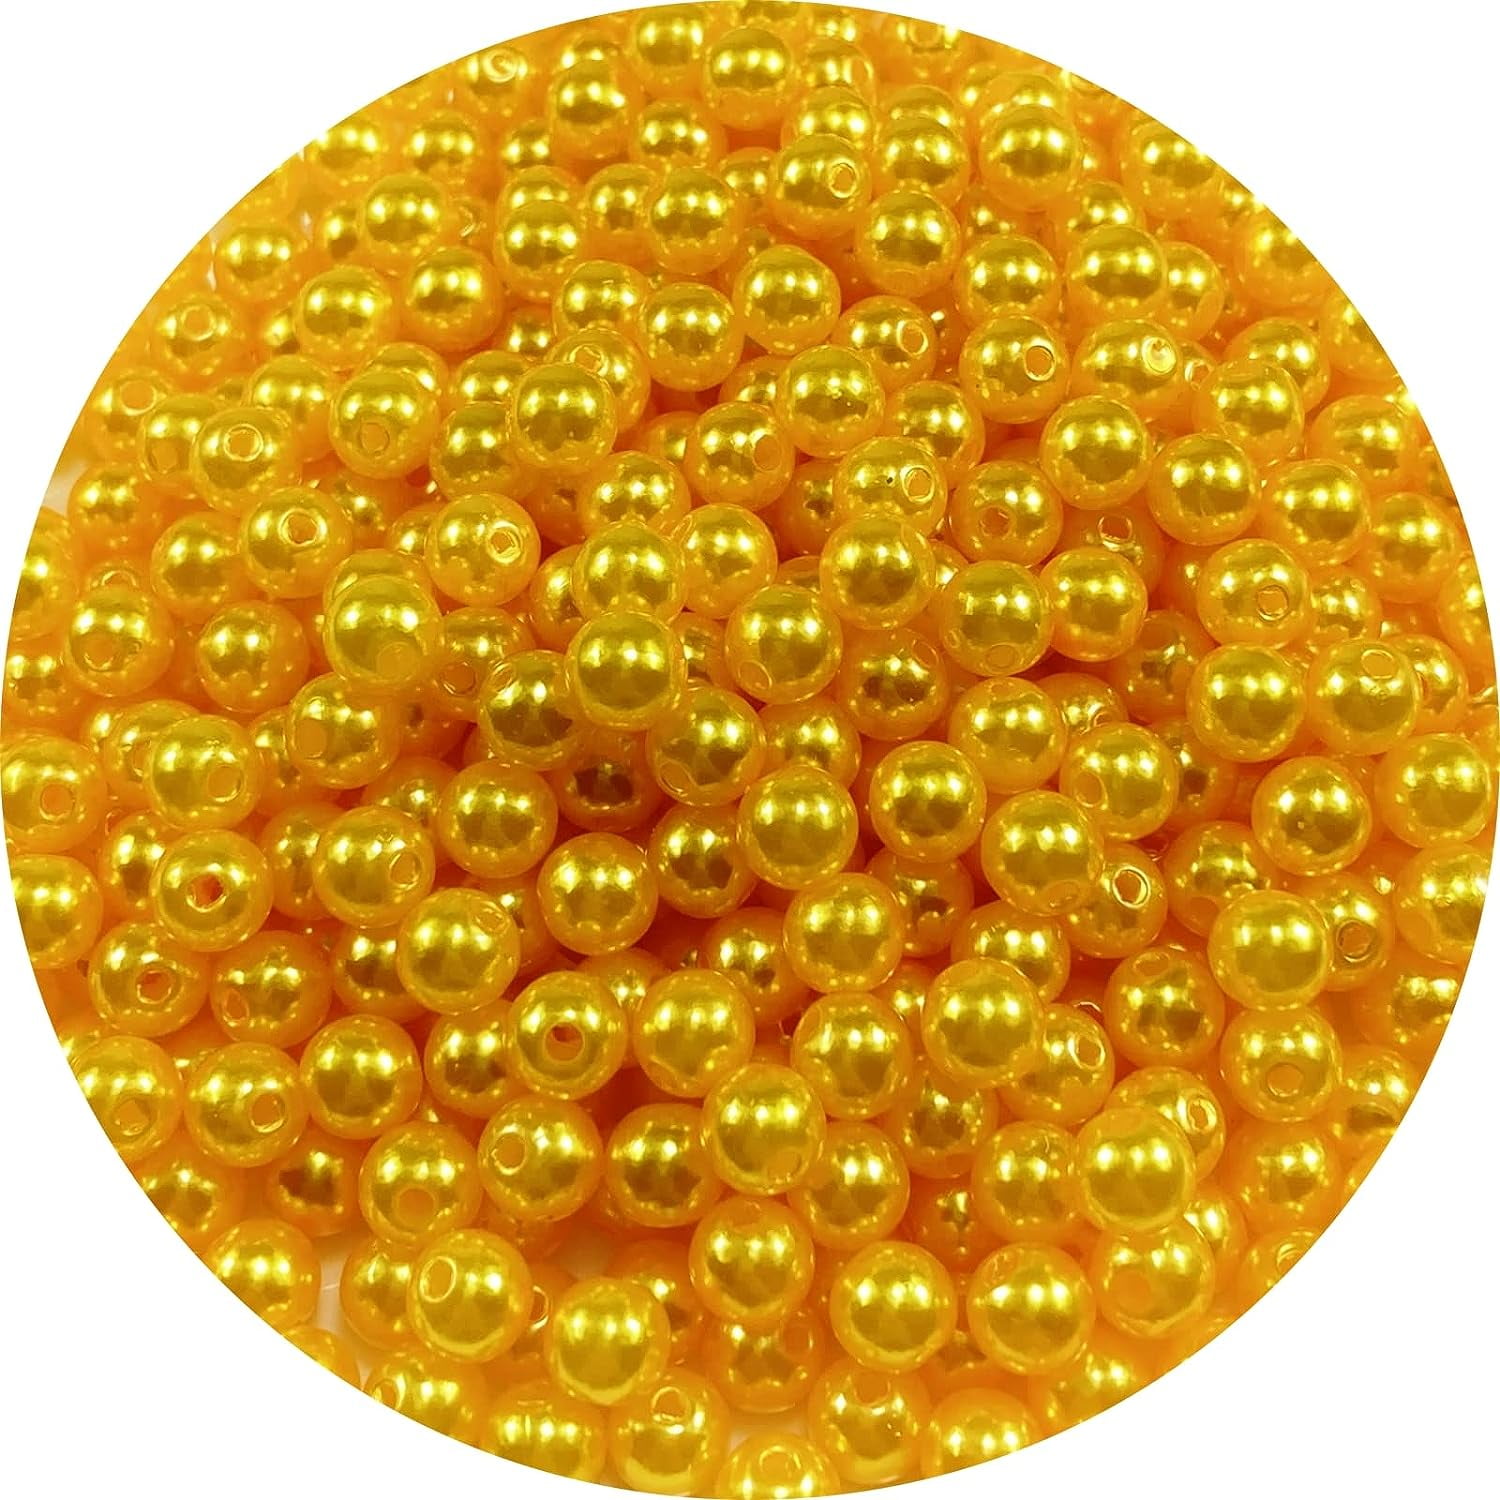 700pcs Pearl Beads 6mm Pearl Craft Beads Round Loose Pearls with